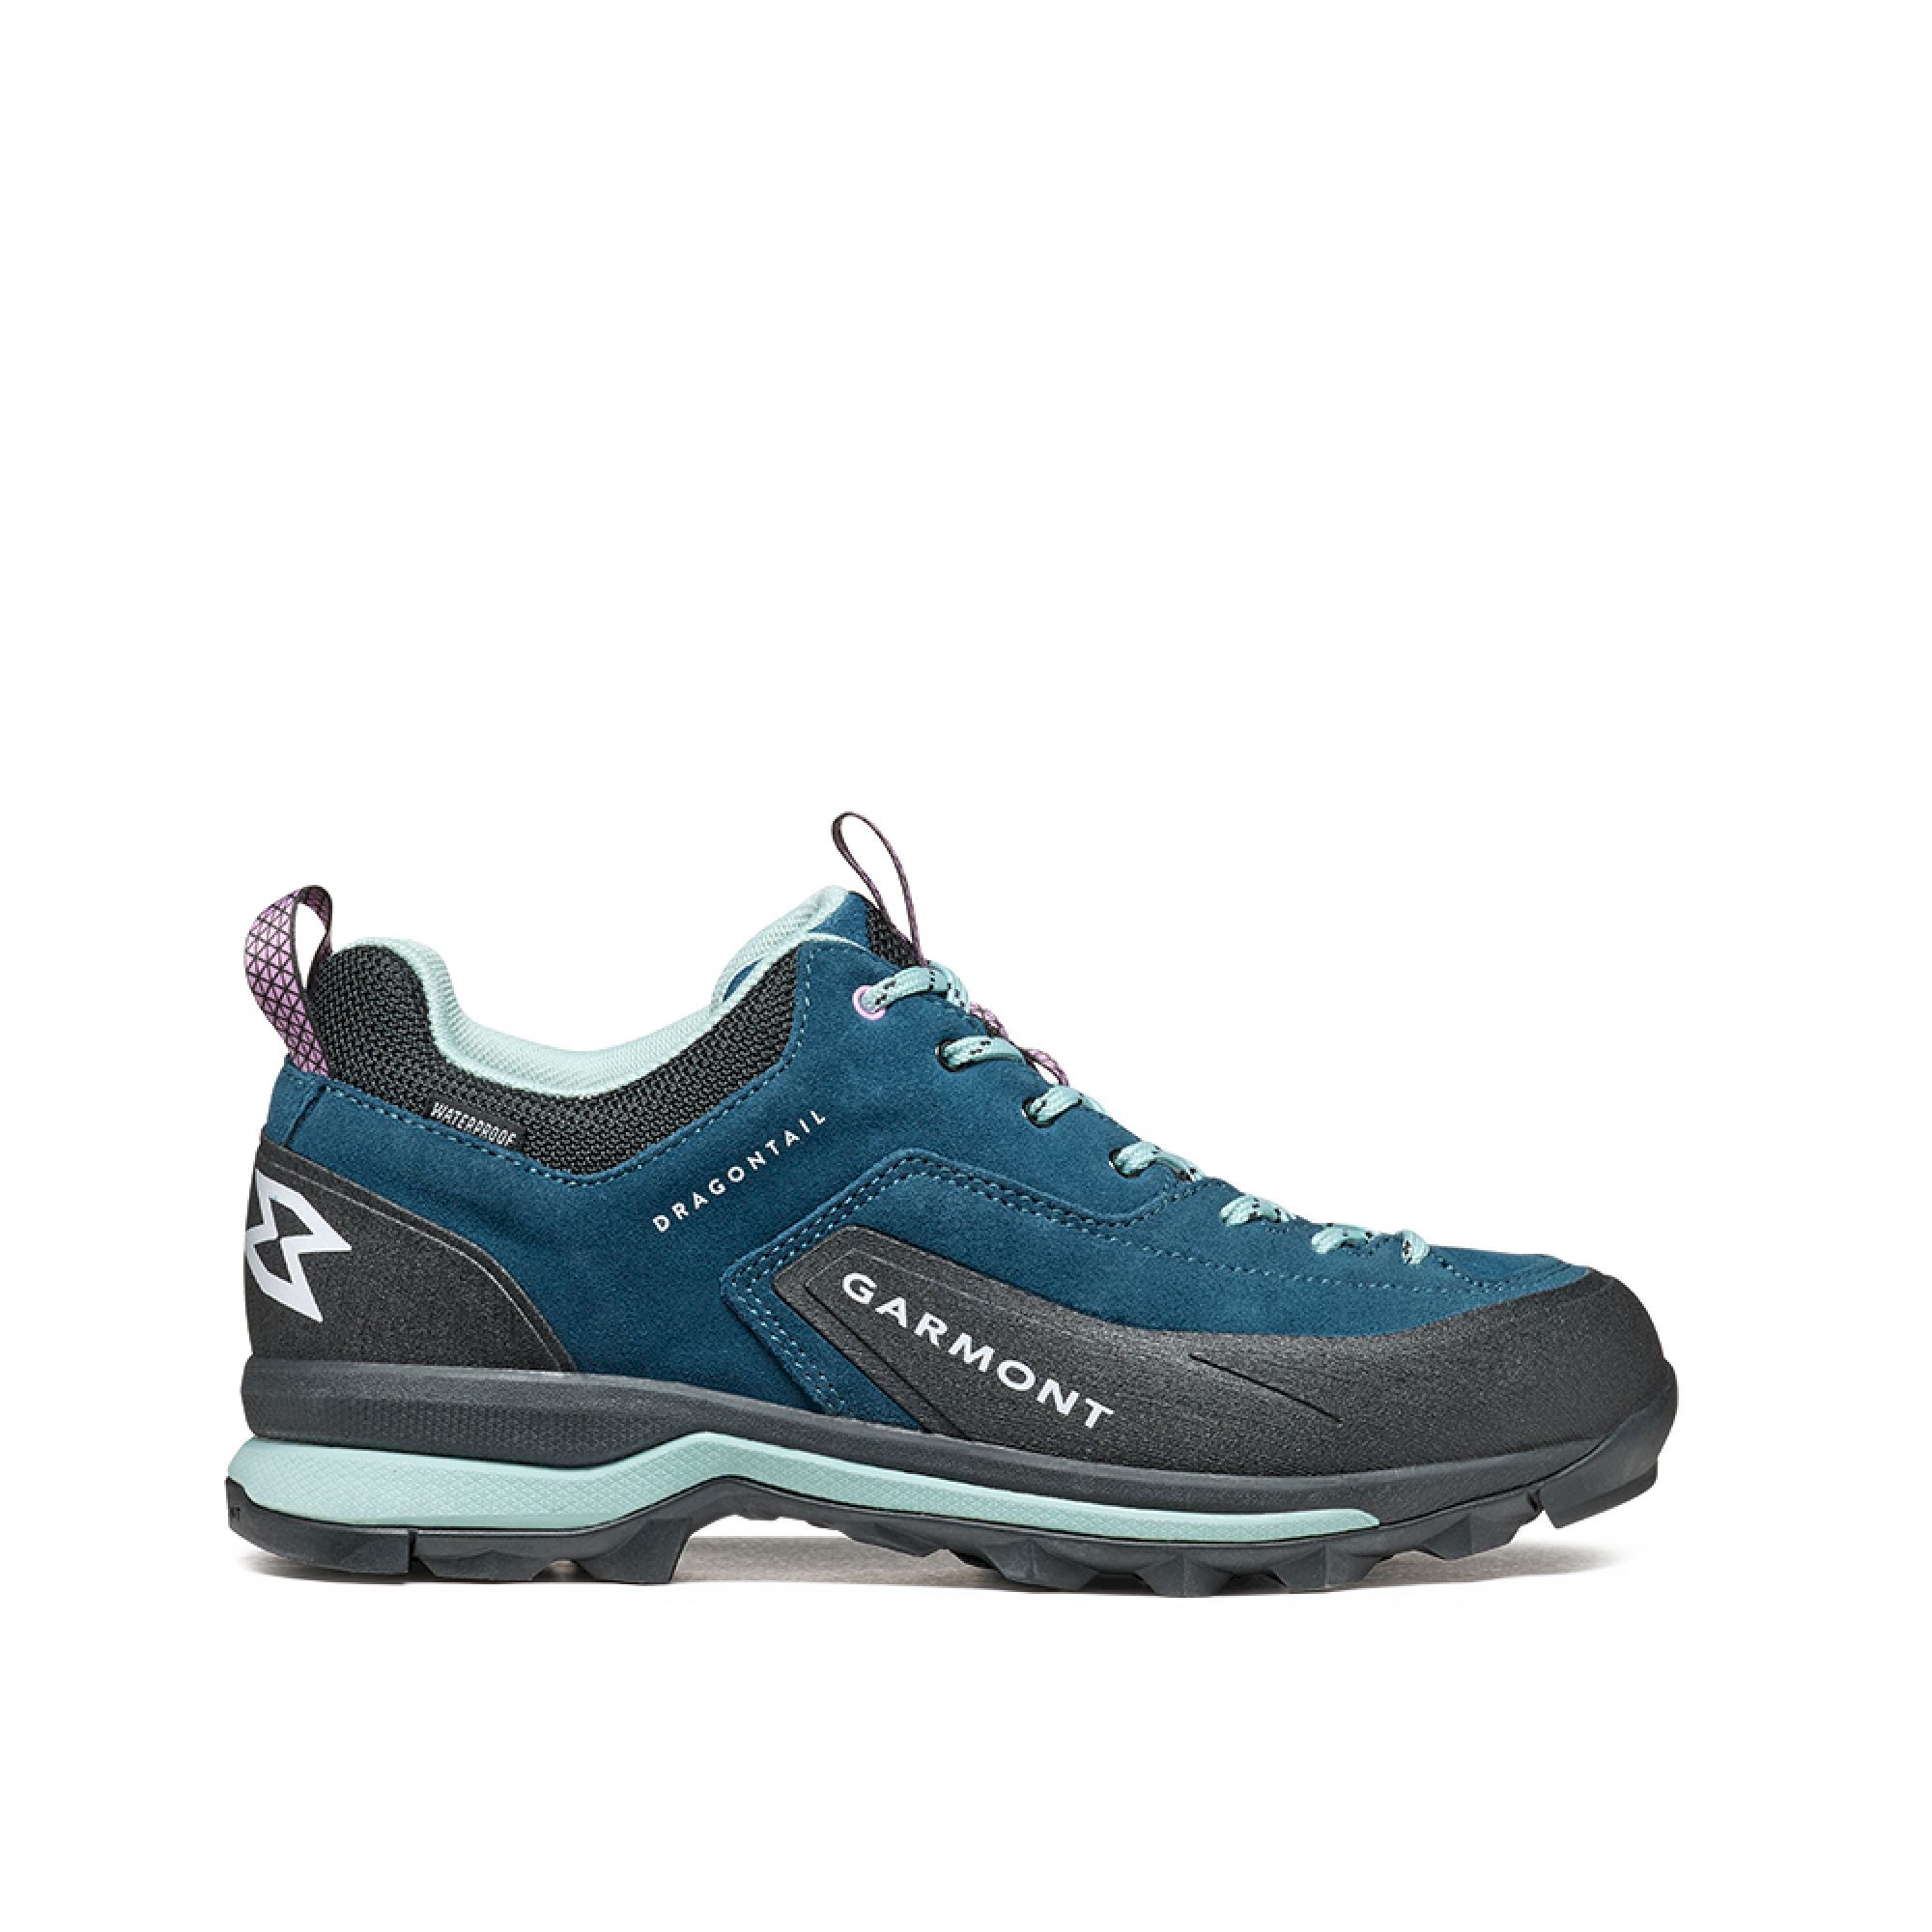 Garmont Dragontail WP - Approach shoes - Women's | Hardloop